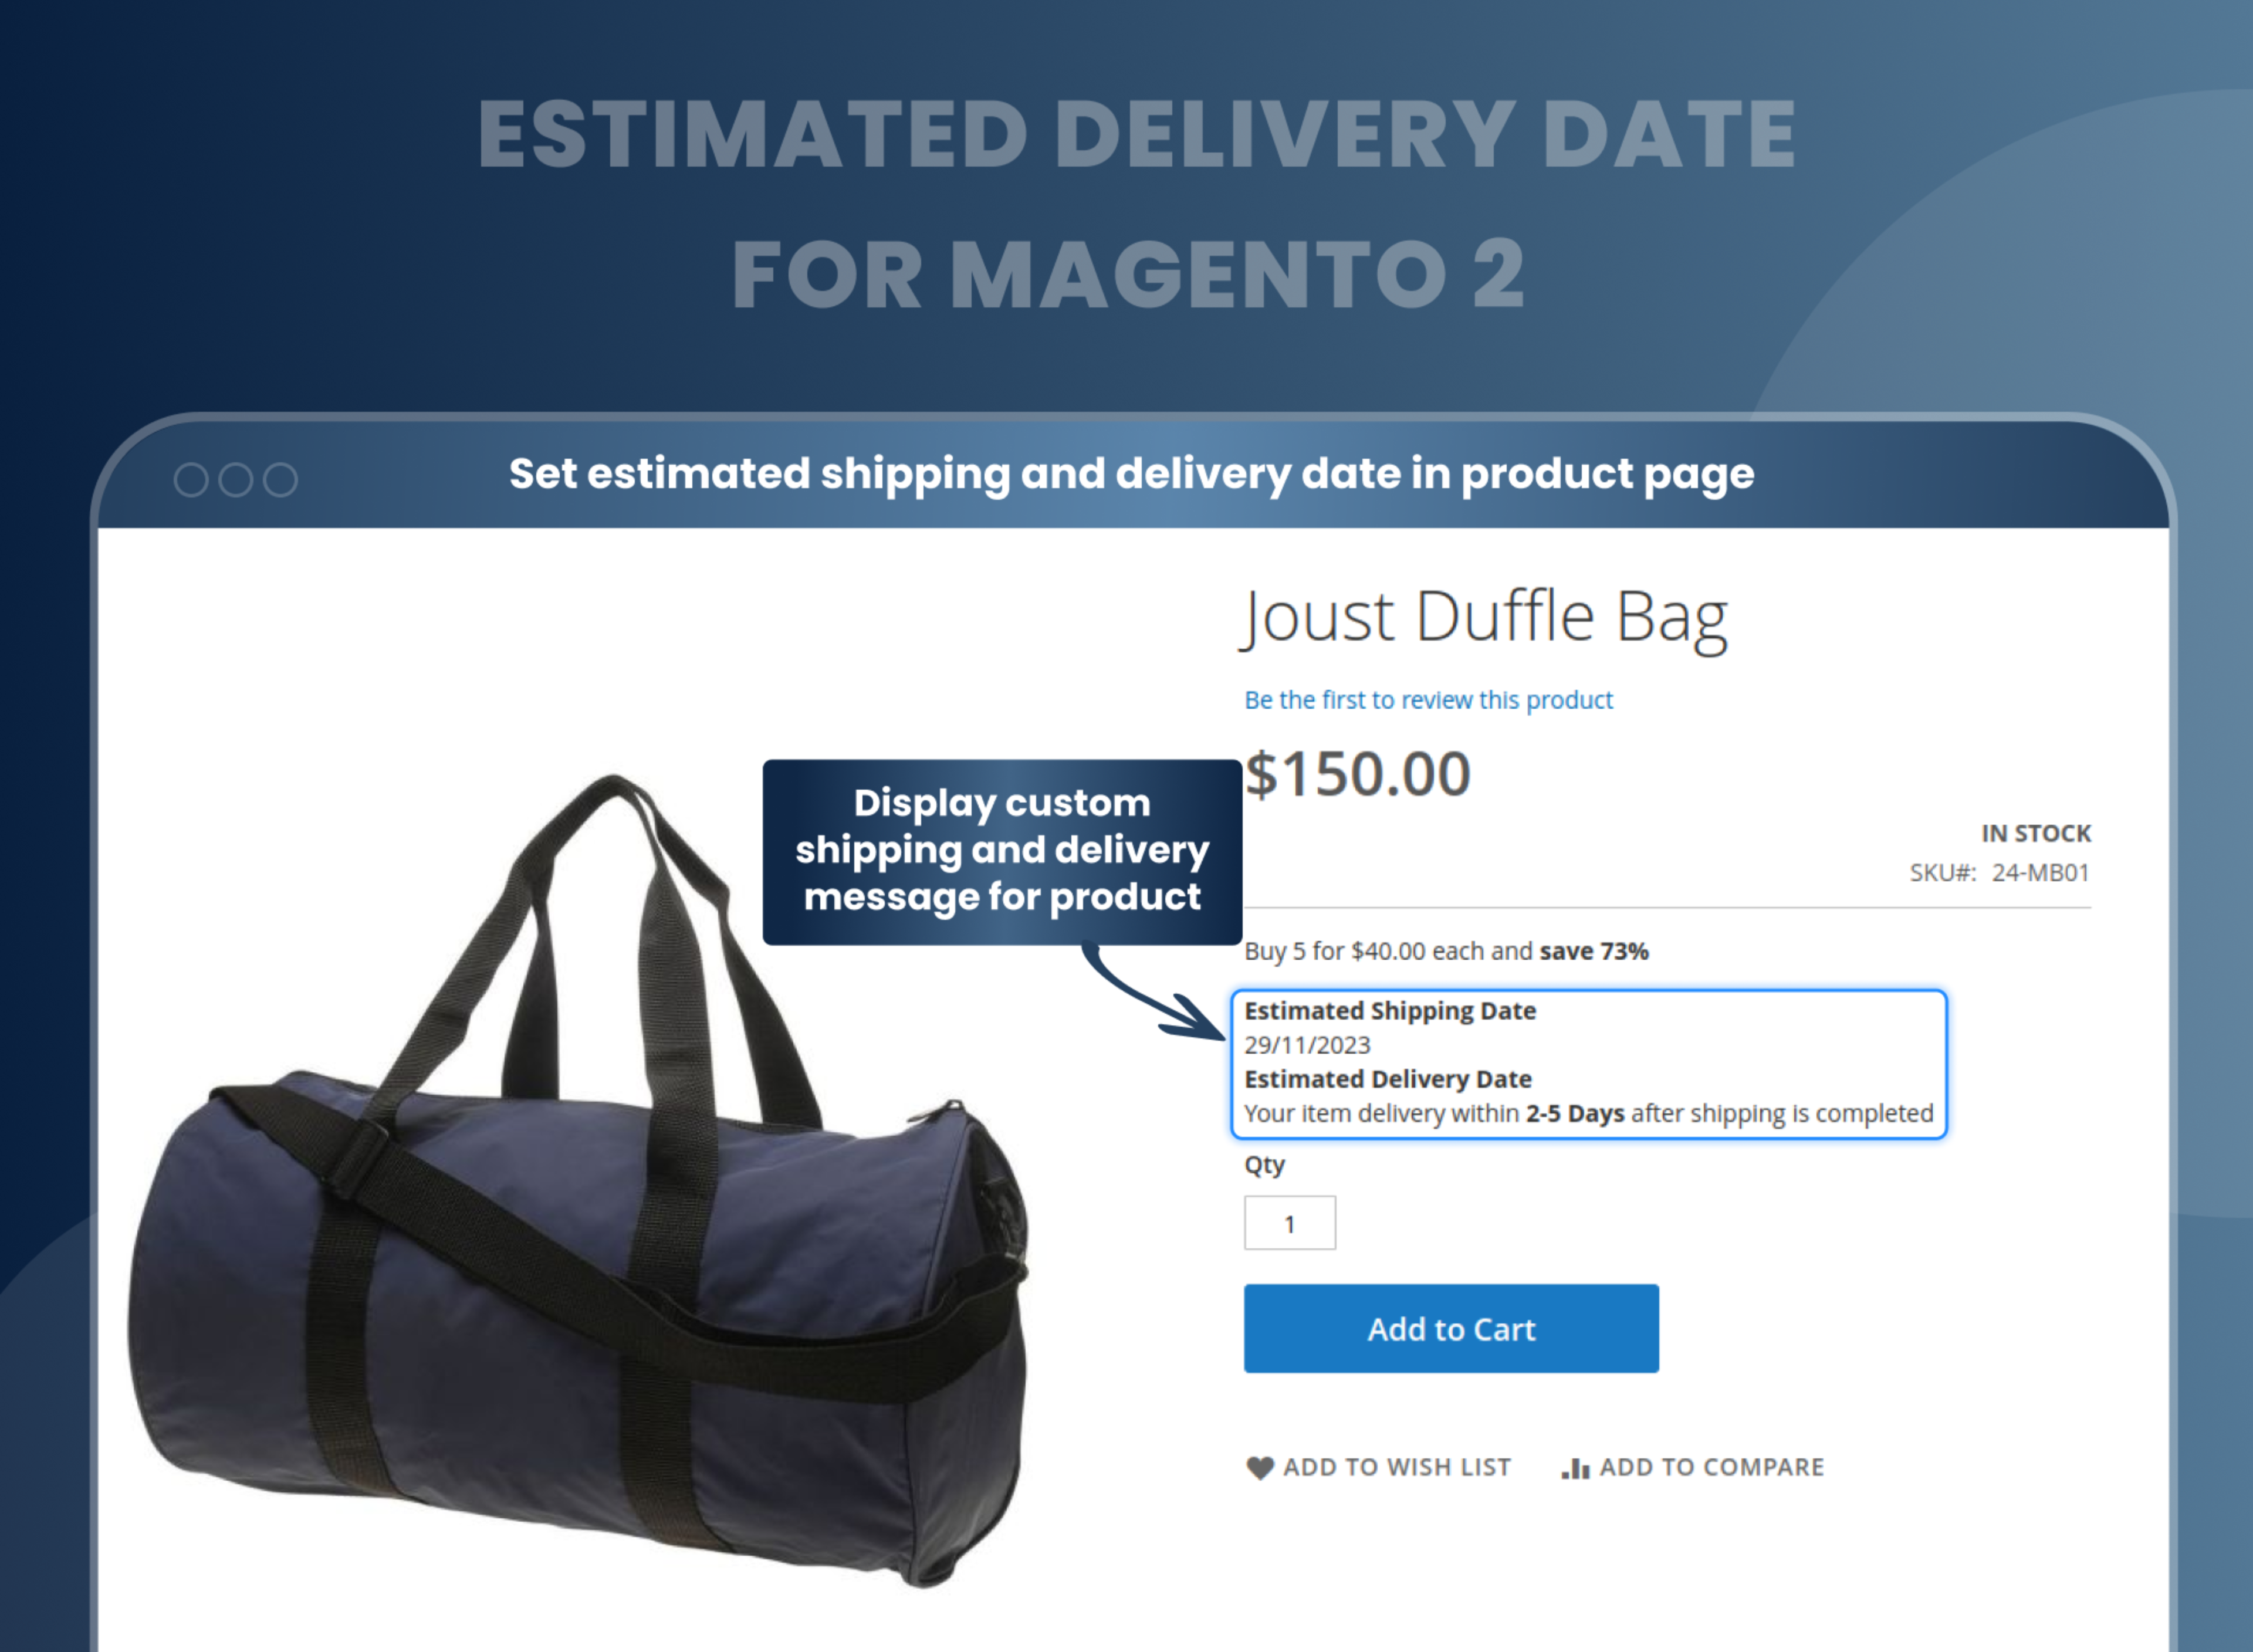 Set estimated shipping and delivery date in product page